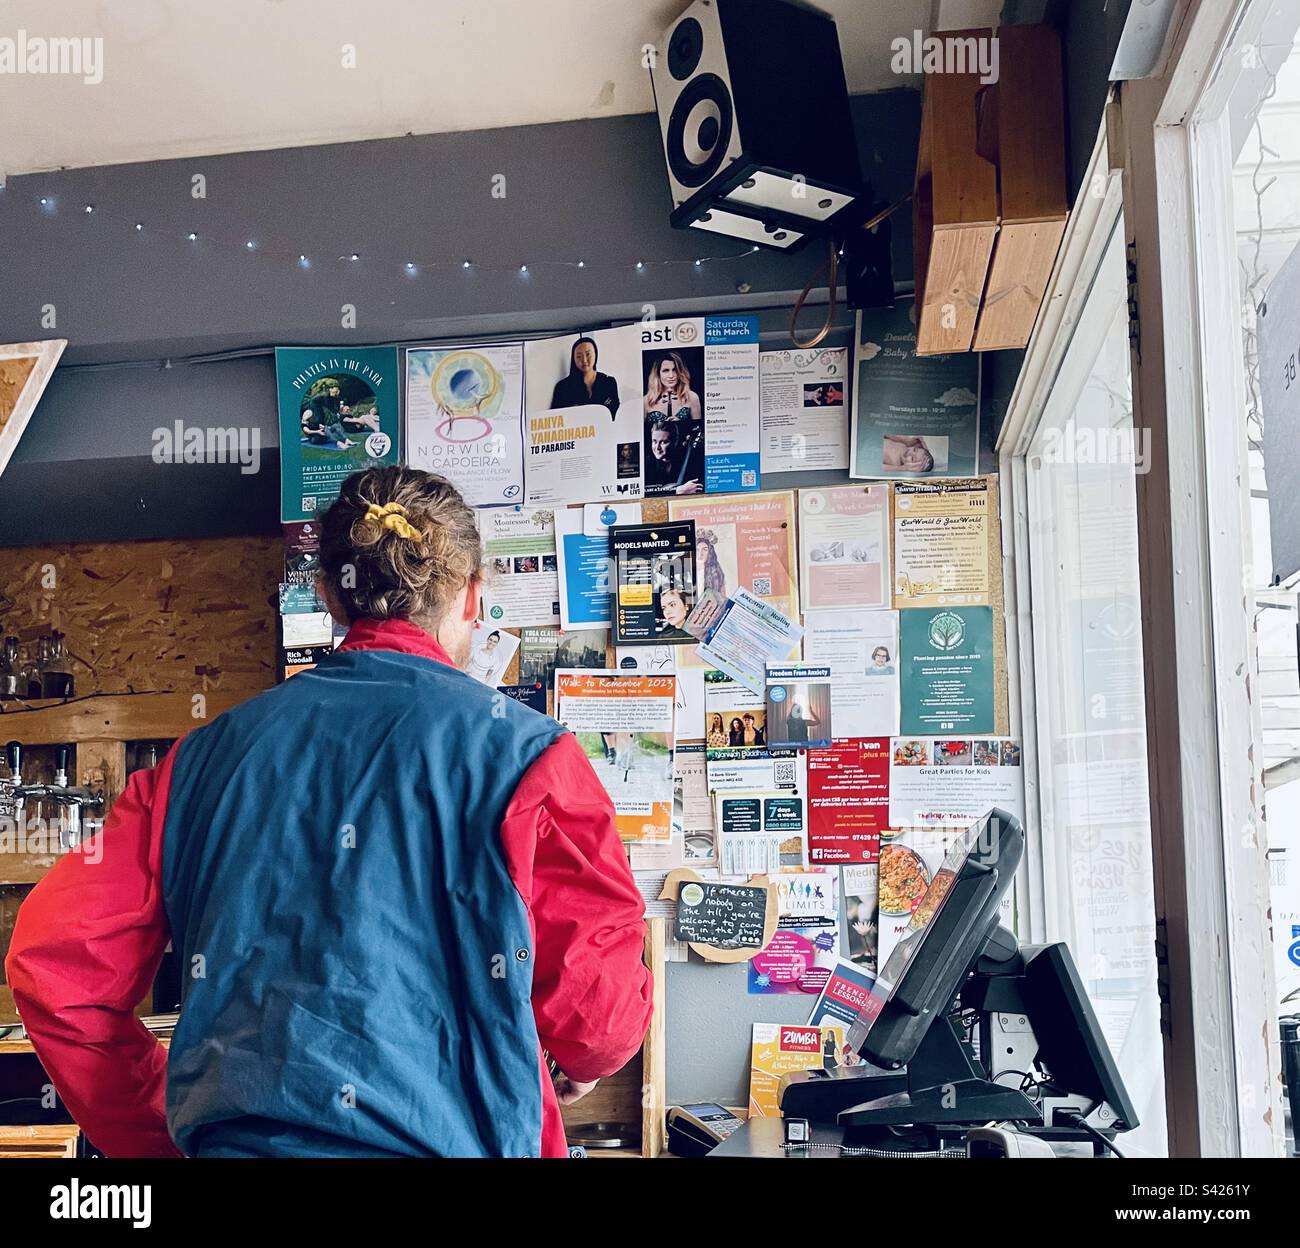 A man looking at local cafe area notice board. Stock Photo